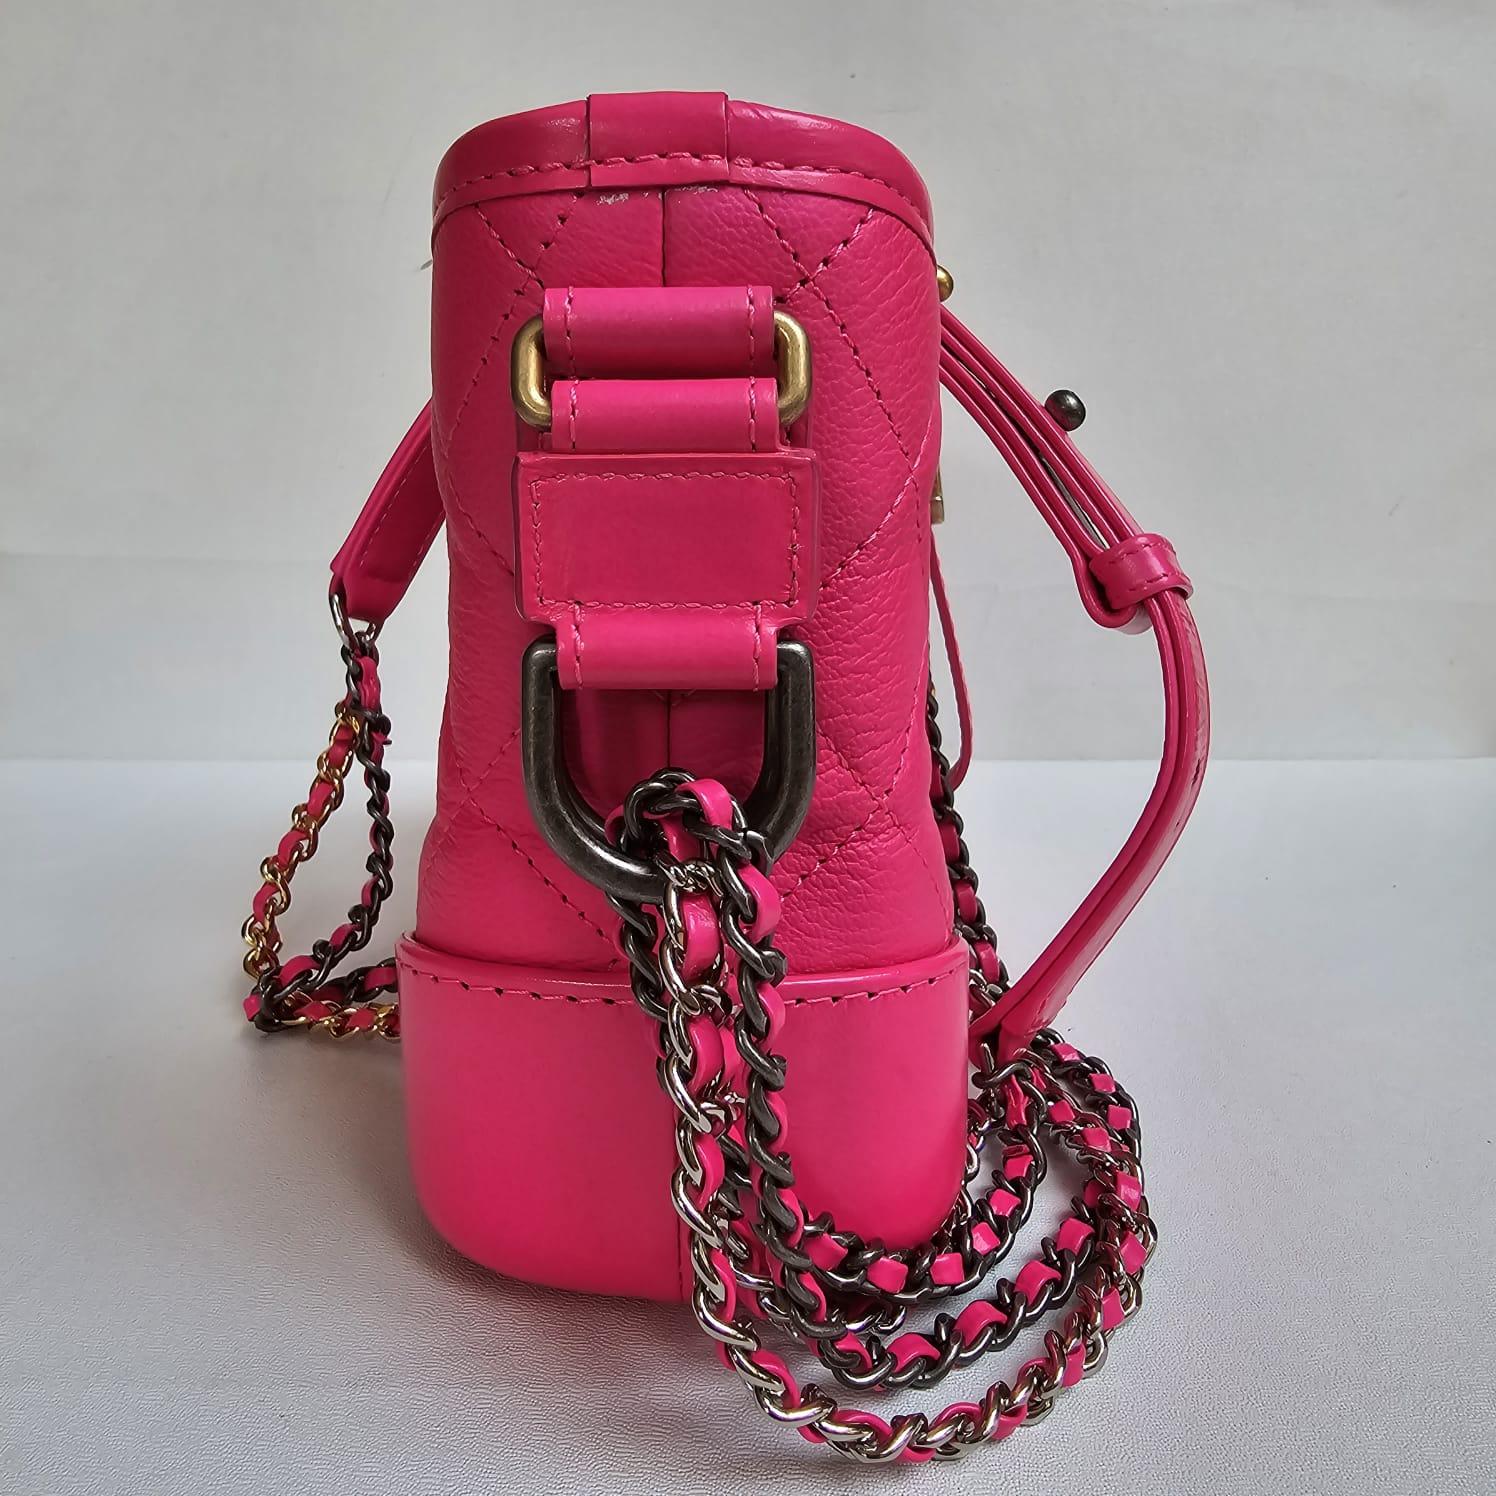 Chanel Neon Pink Small Gabrielle Bag For Sale 7